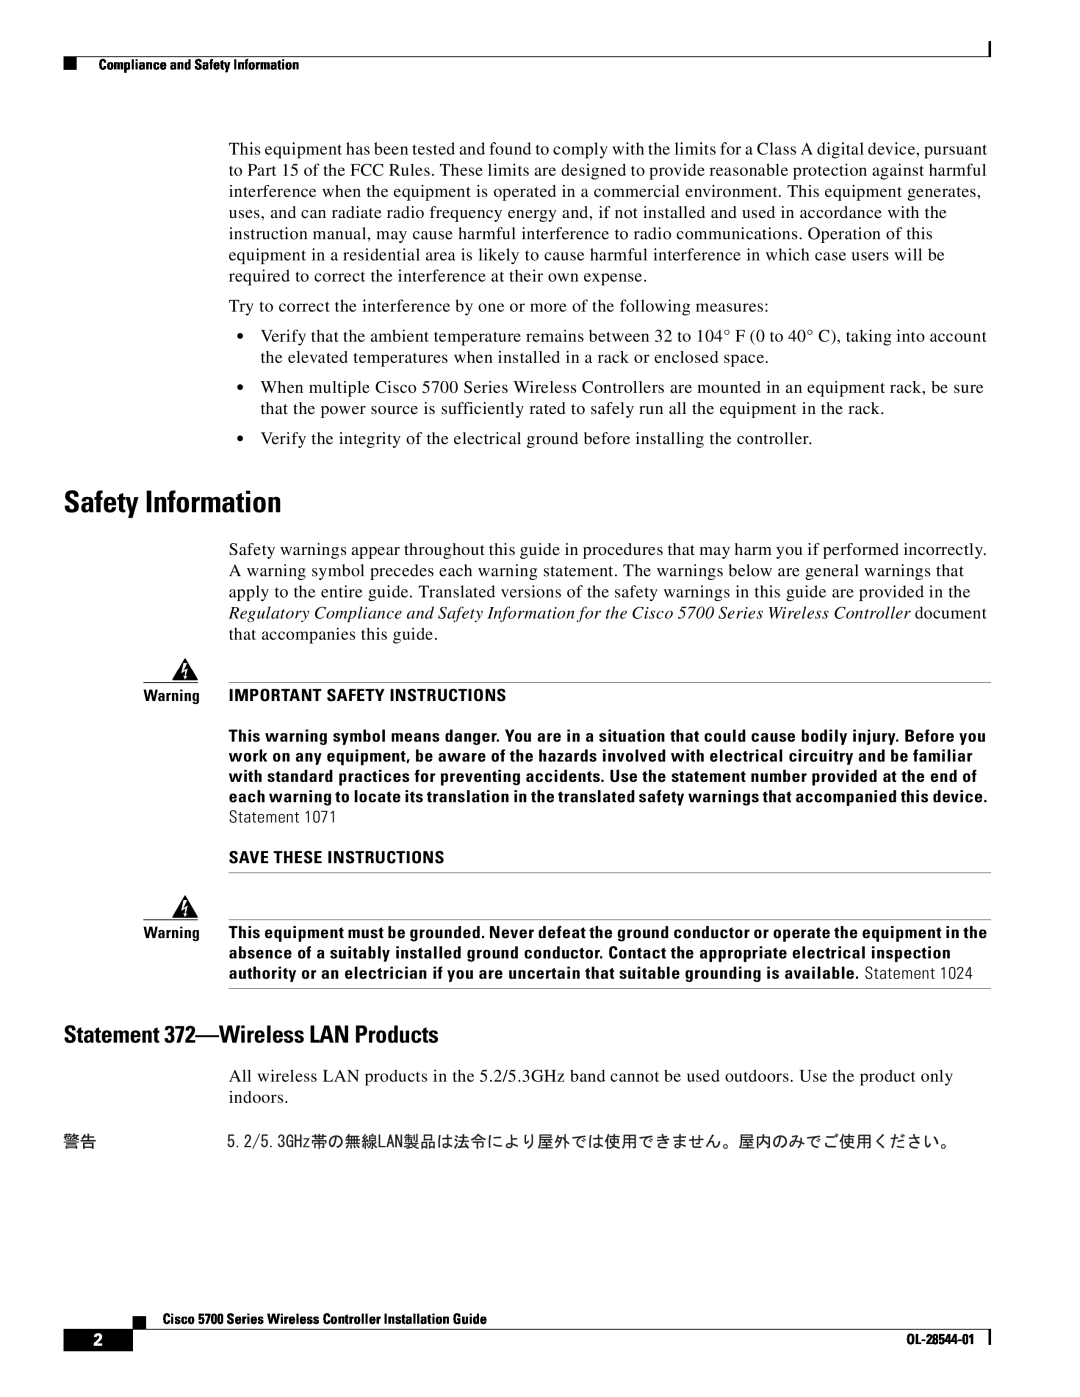 Cisco Systems AIRCT5760HAK9 Safety Information, Statement 372-Wireless LAN Products, Warning IMPORTANT SAFETY INSTRUCTIONS 